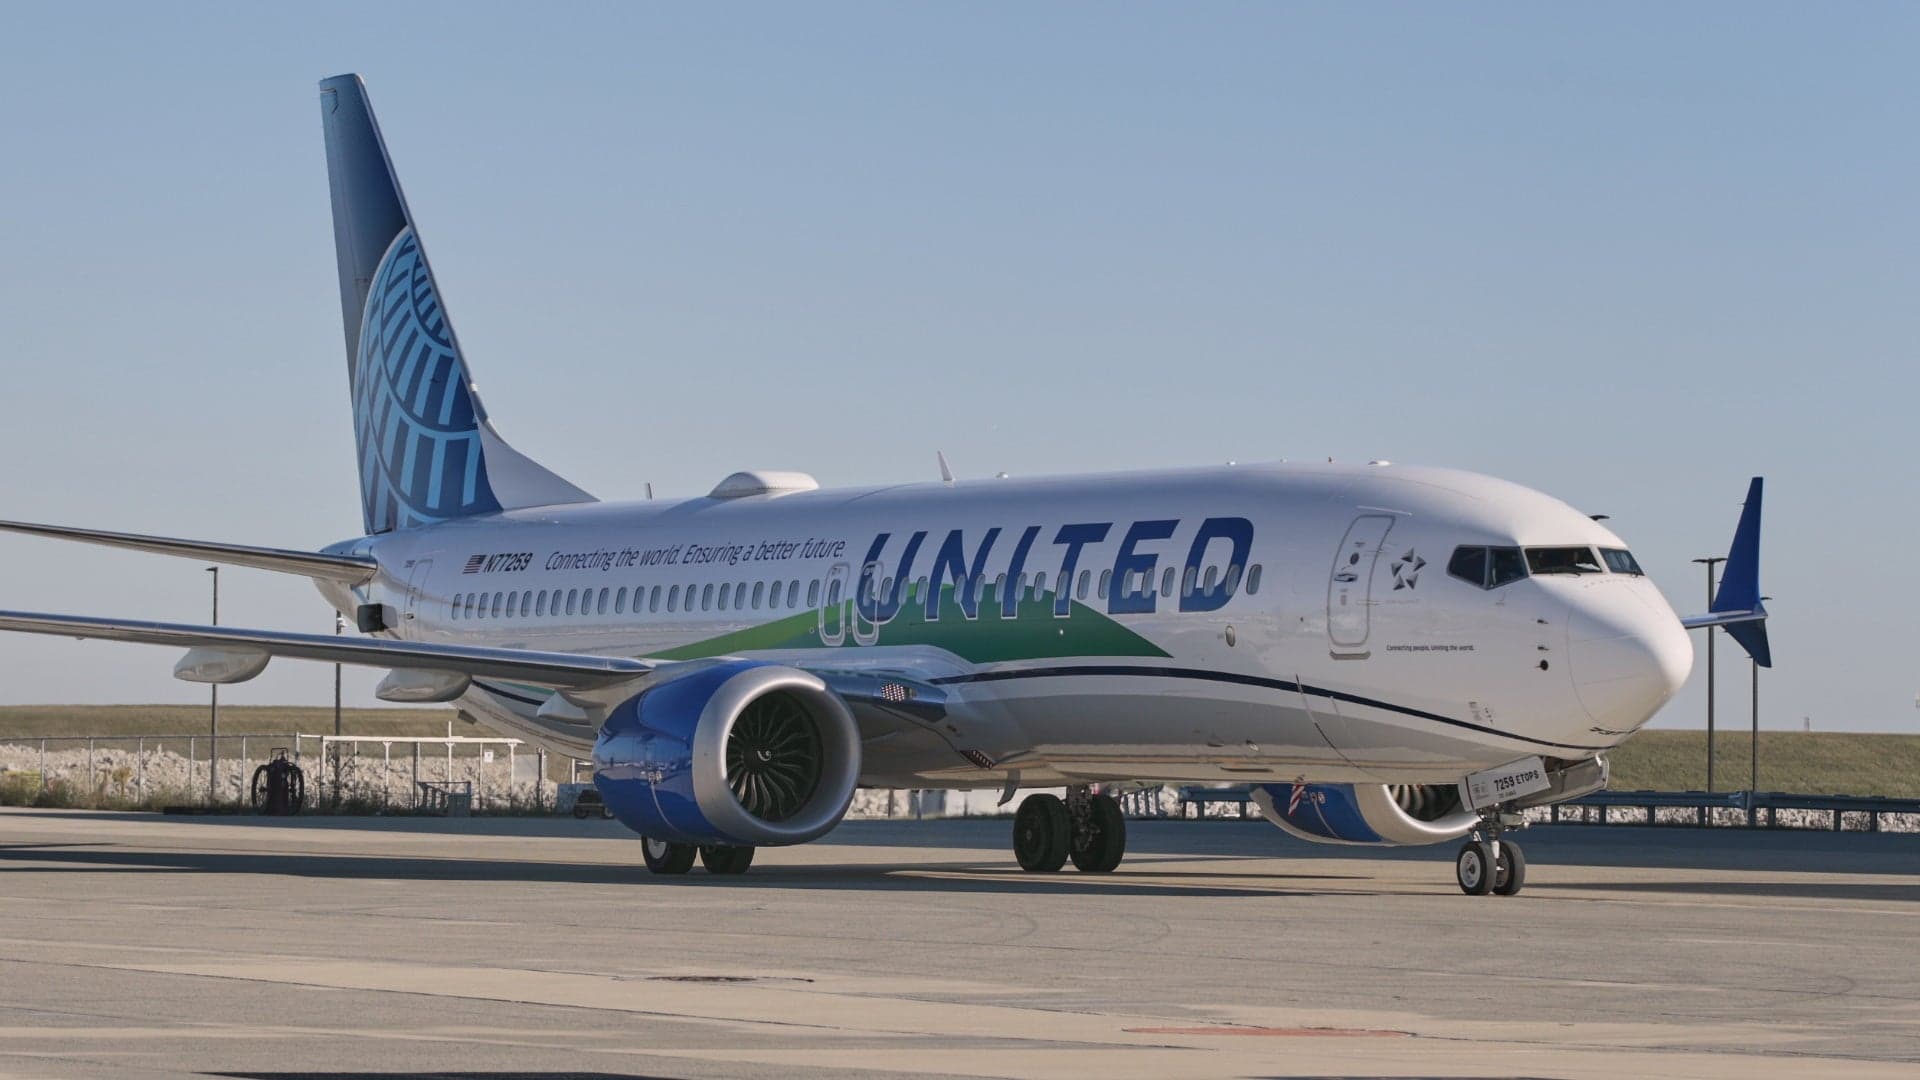 United Airlines Flew a Passenger Flight With Sustainable Aviation Fuel. What’s Next?